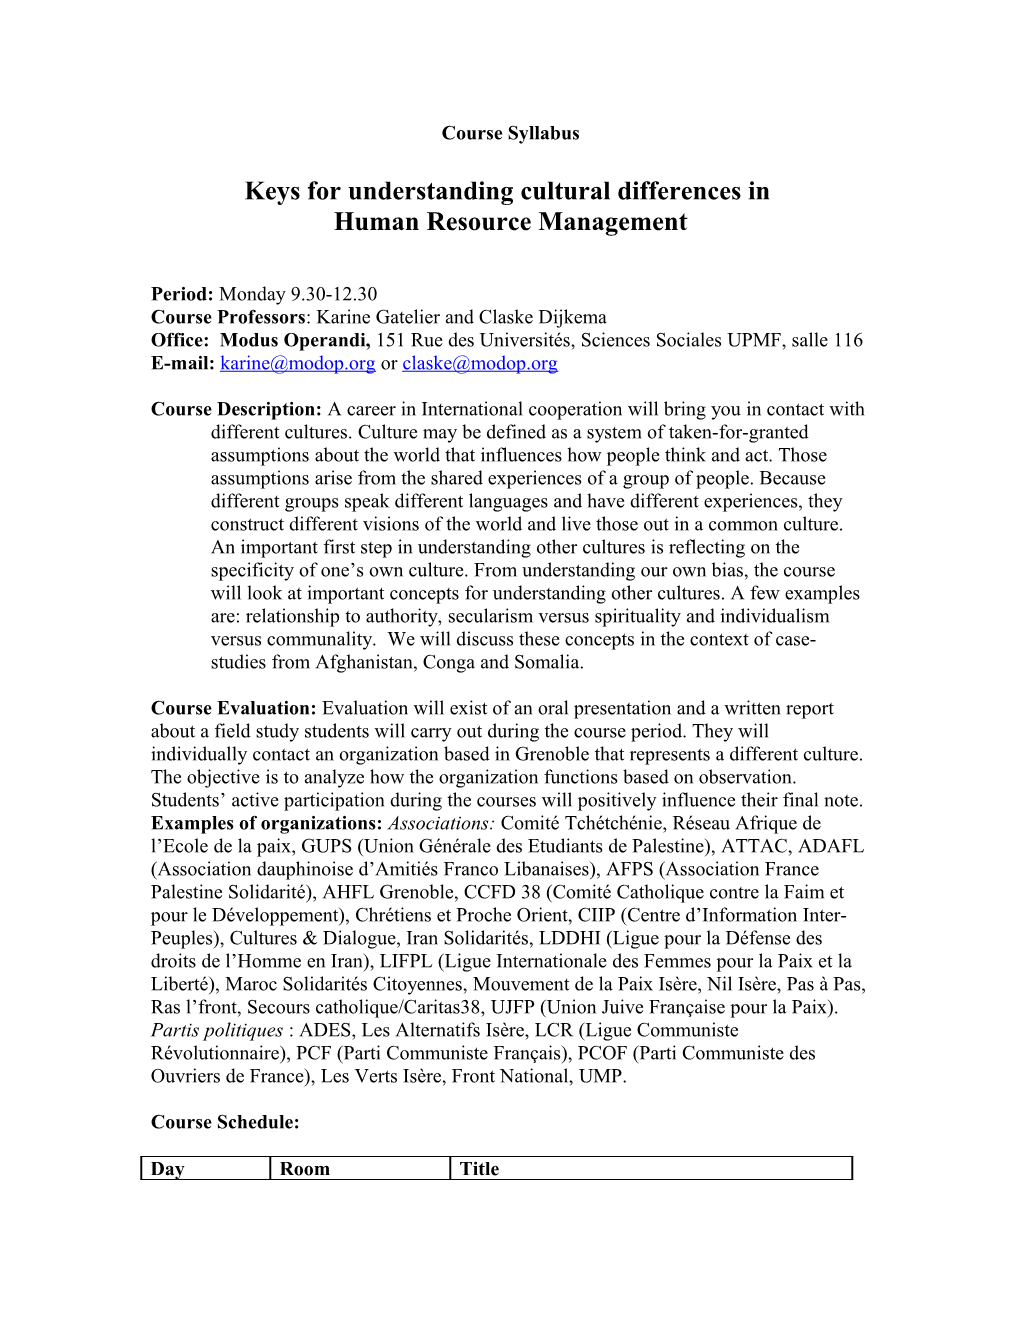 Keys for Understanding Cultural Differences In